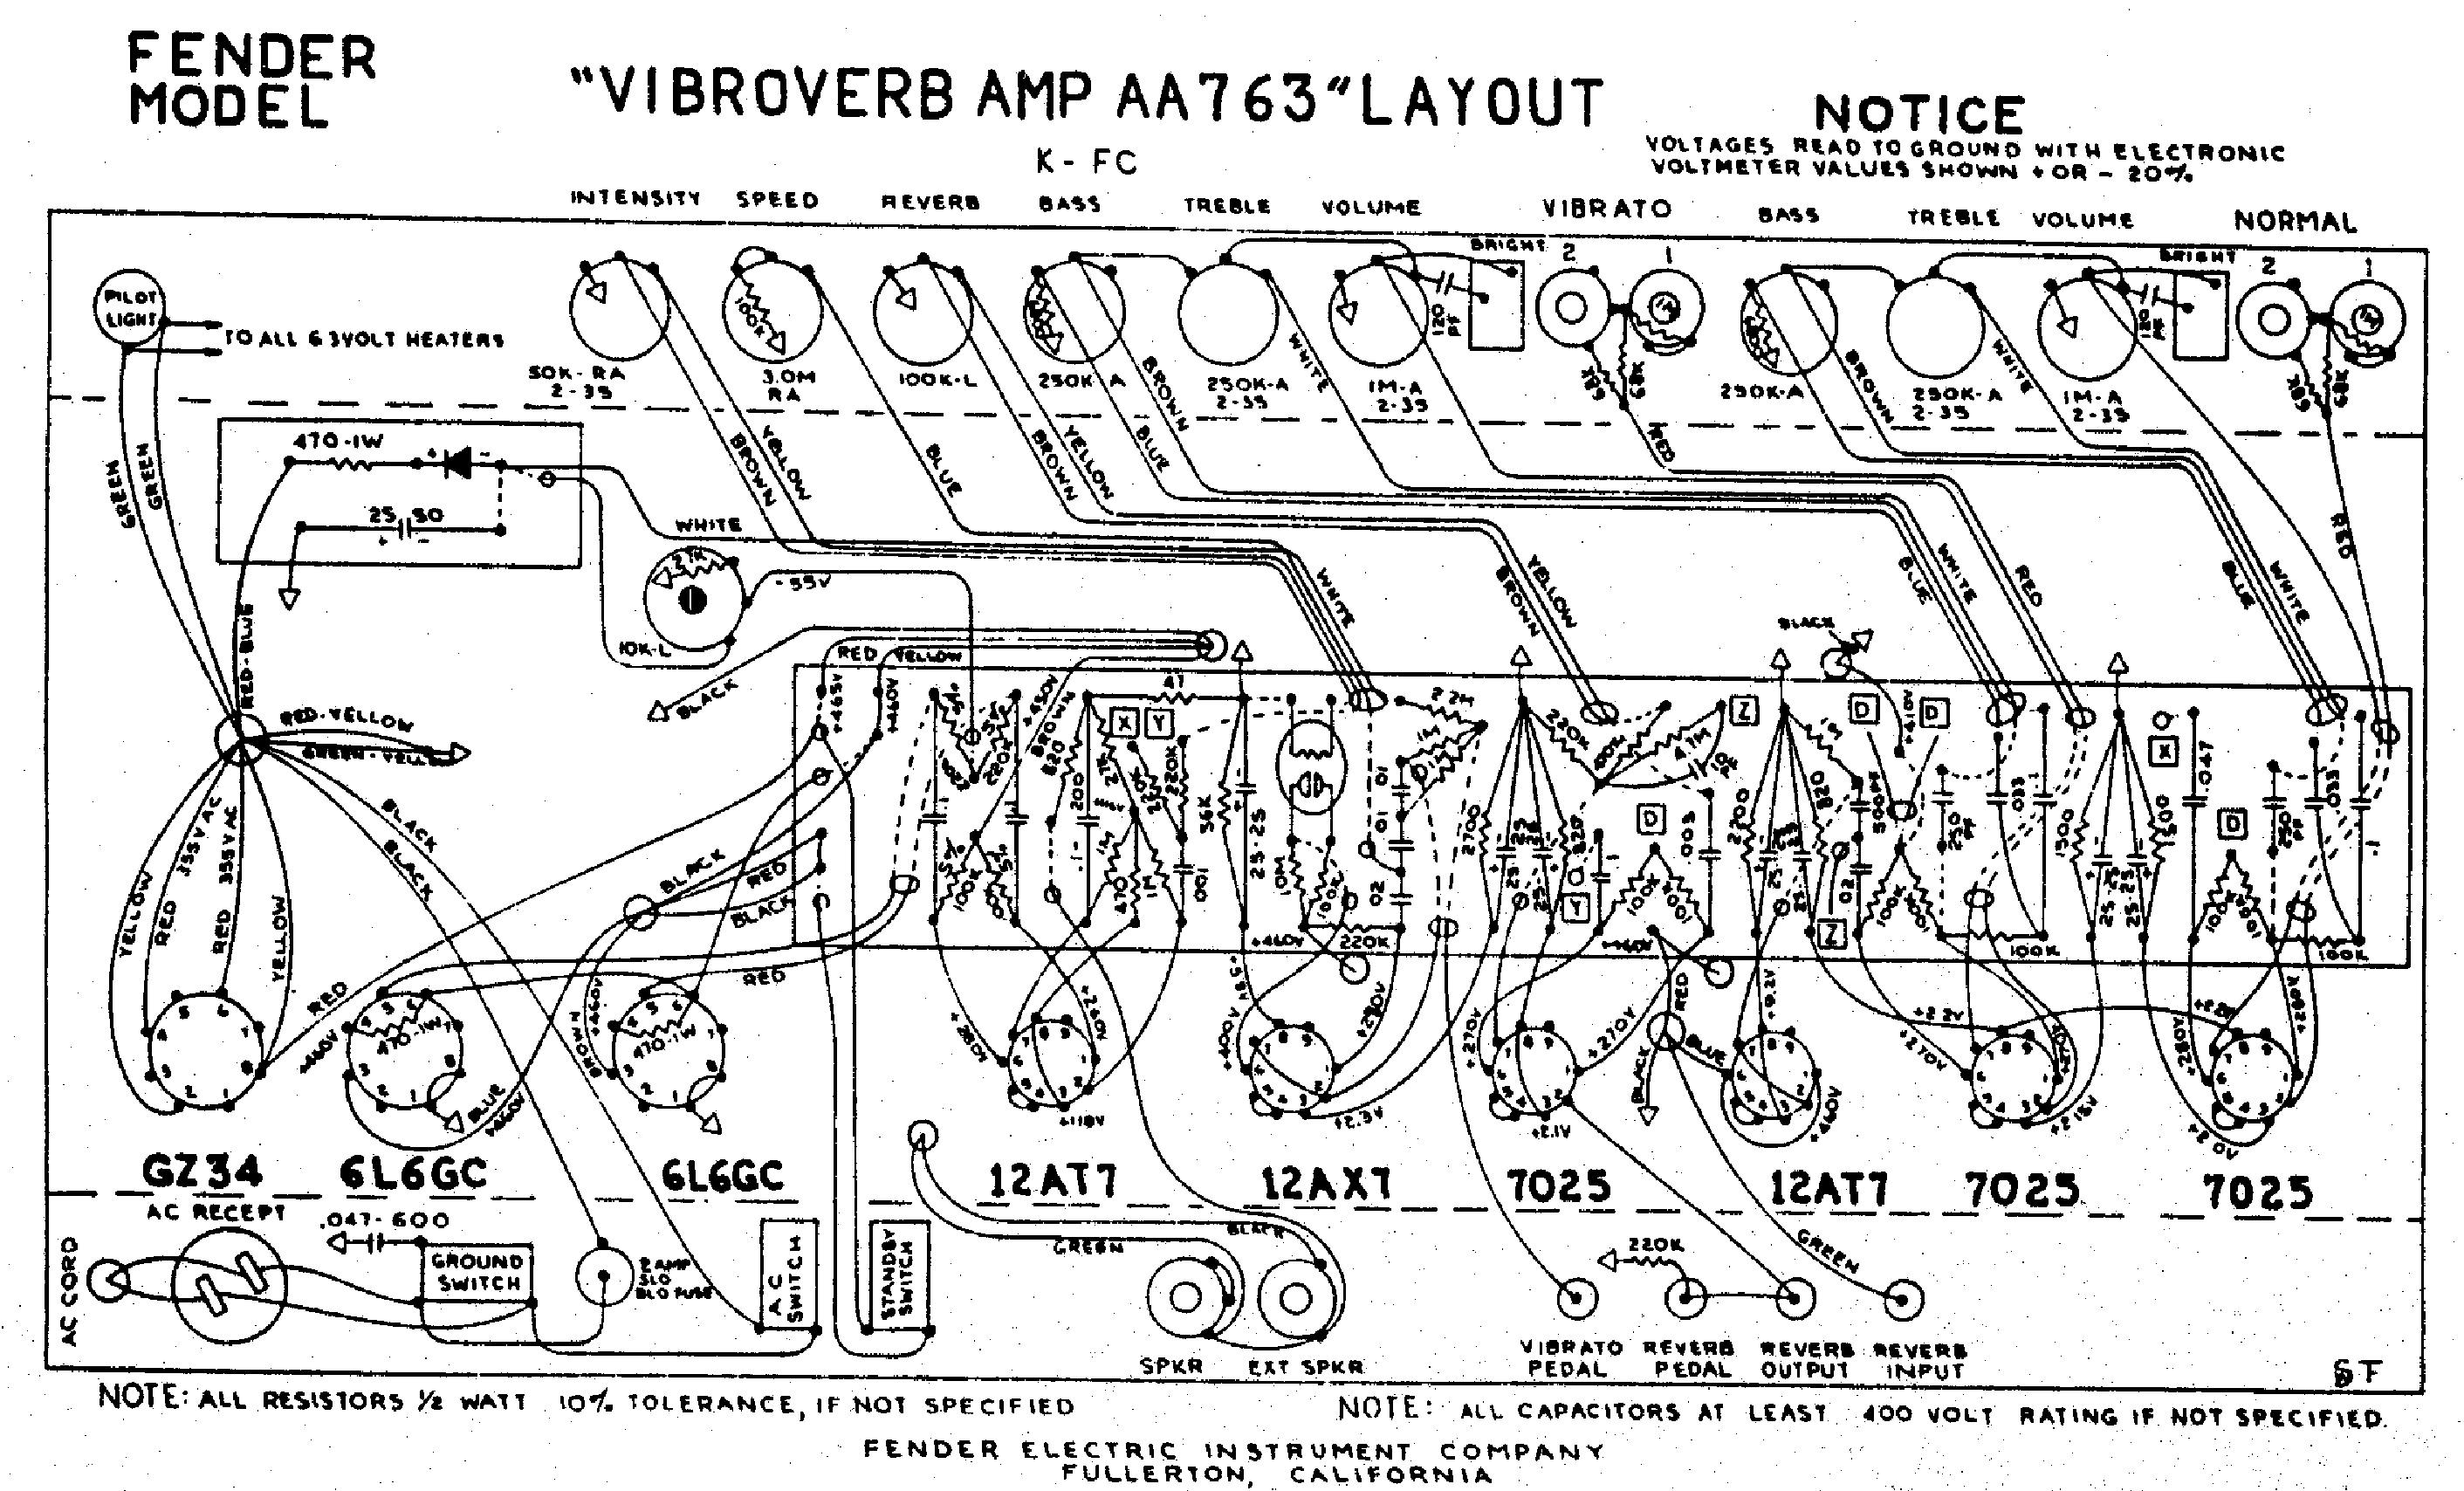 FENDER VIBROVERB AA763 SCH service manual (2nd page)